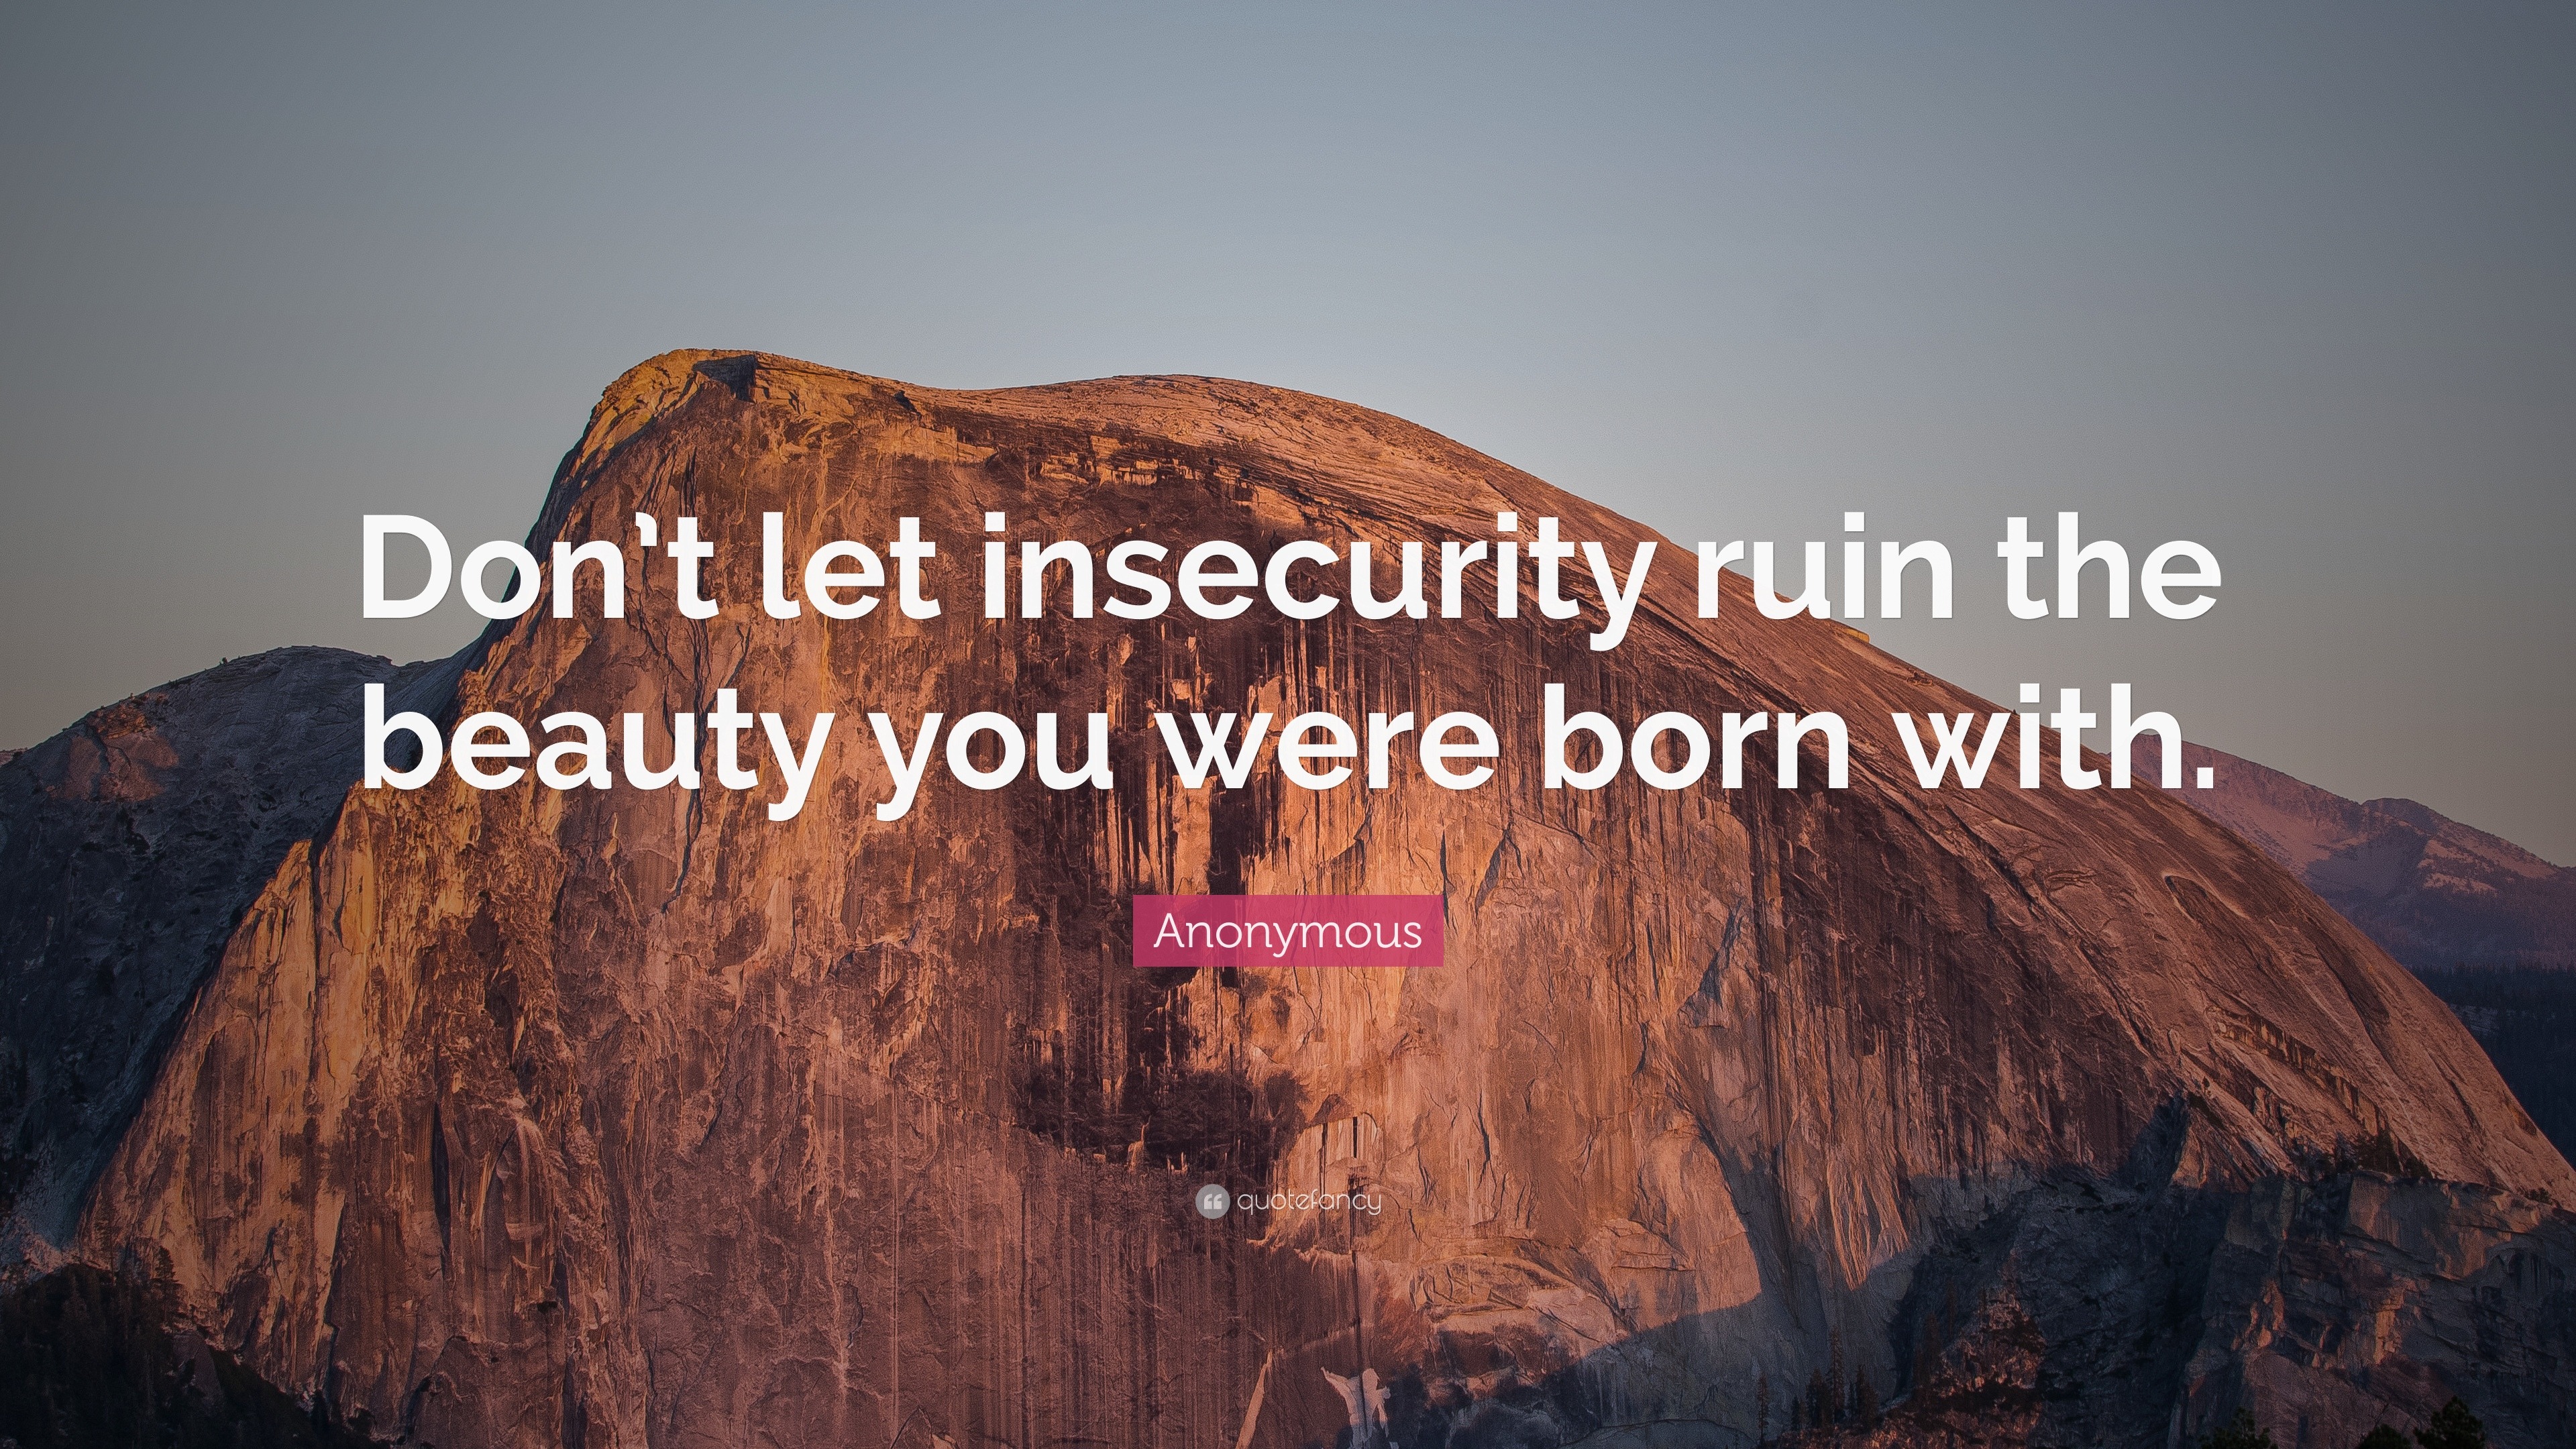 Anonymous Quote: “Don’t let insecurity ruin the beauty you were born with.”